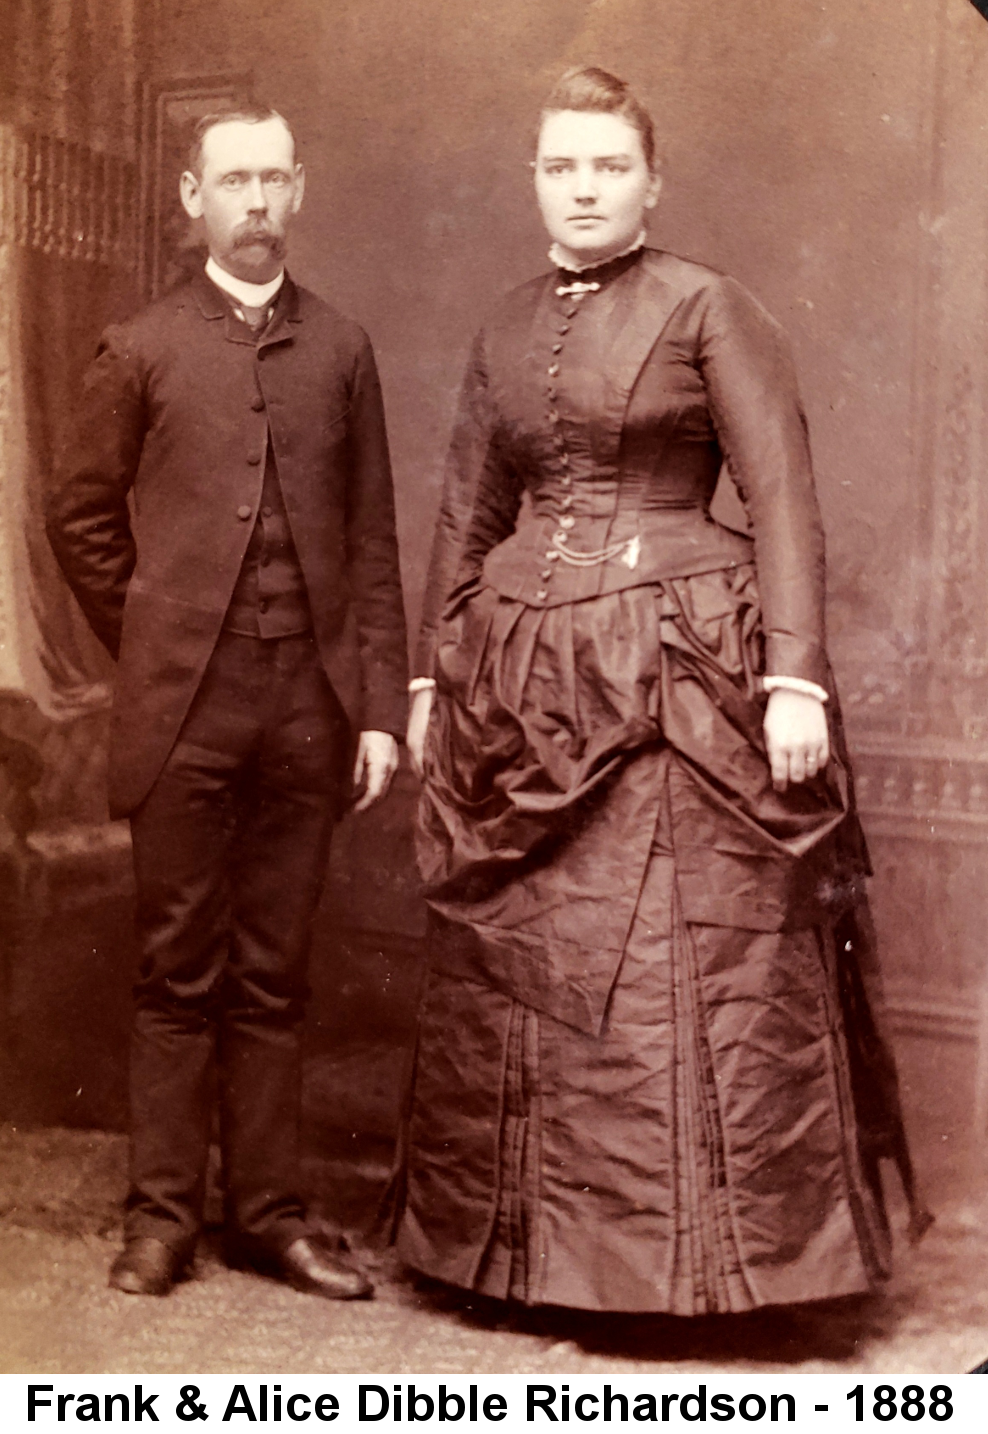 IMAGE/PHOTO: Frank & Alice Dibble Richardson - 1888: Rose-tinted full-length studio portrait photo a thin man with a bushy moustache standing next to a rather broad young woman in a dark, tightly-corseted long dress with a watch chain, the backs of their hands almost touching.